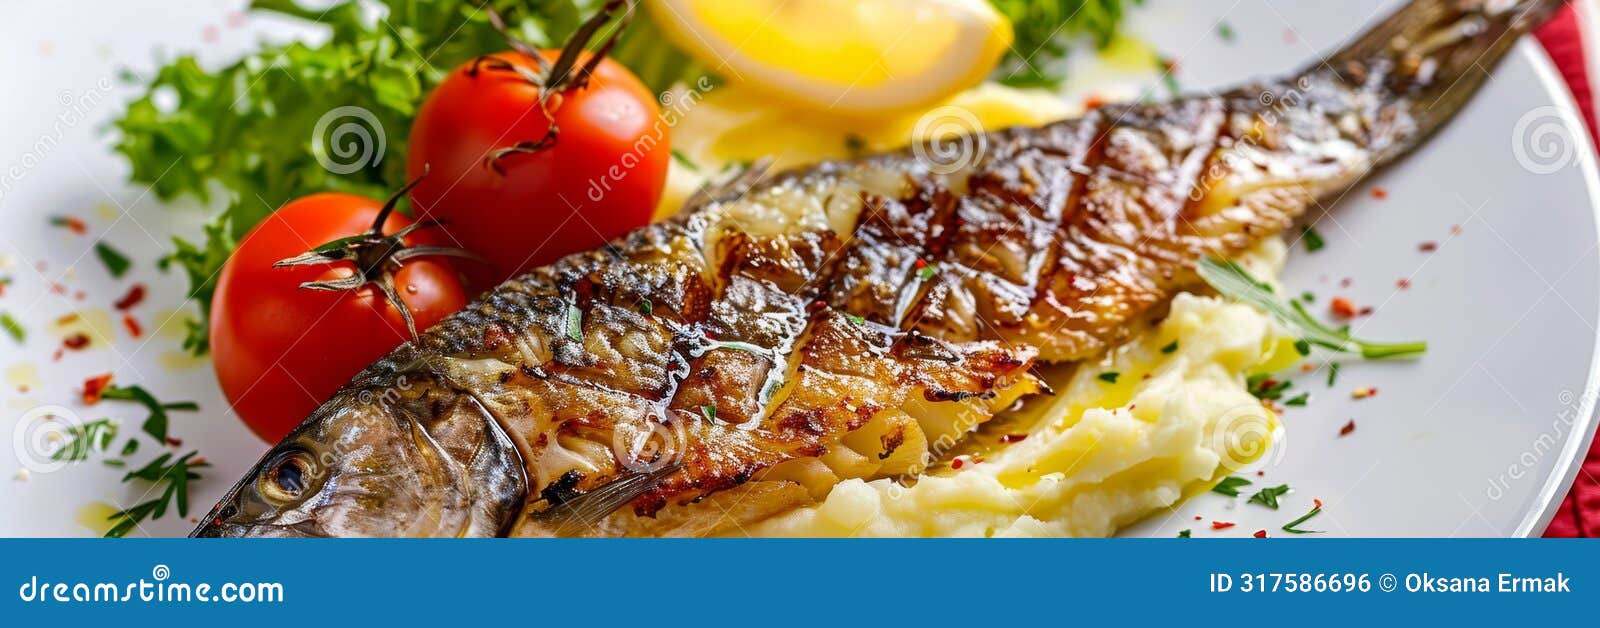 grilled mackerel with mashed potatoes and tomatoes, fried scomber fillet